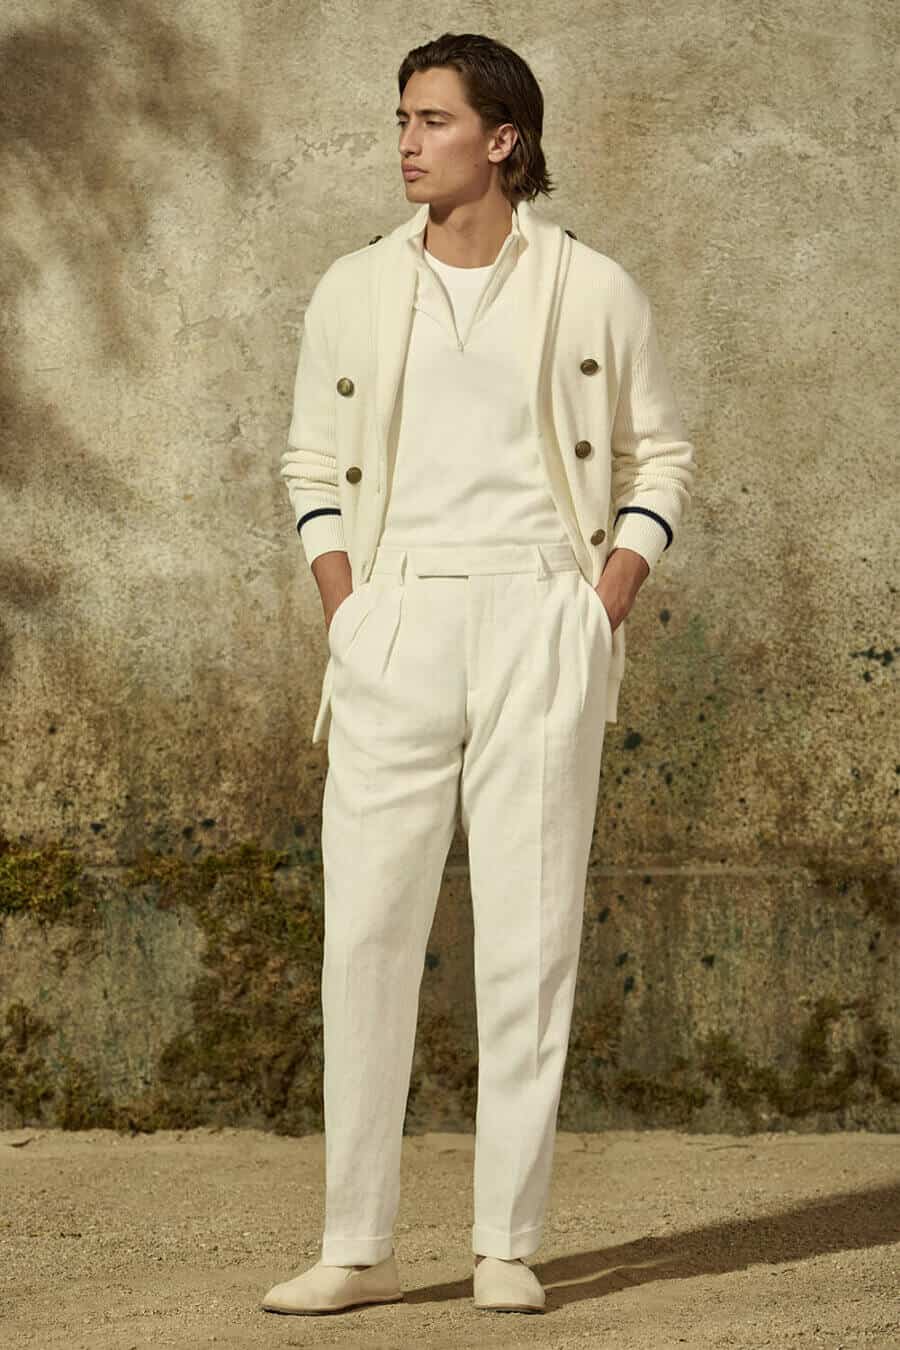 All white outfit for men - white pleated trousers, white half-zip sweater, white cardigan and canvas espadrilles